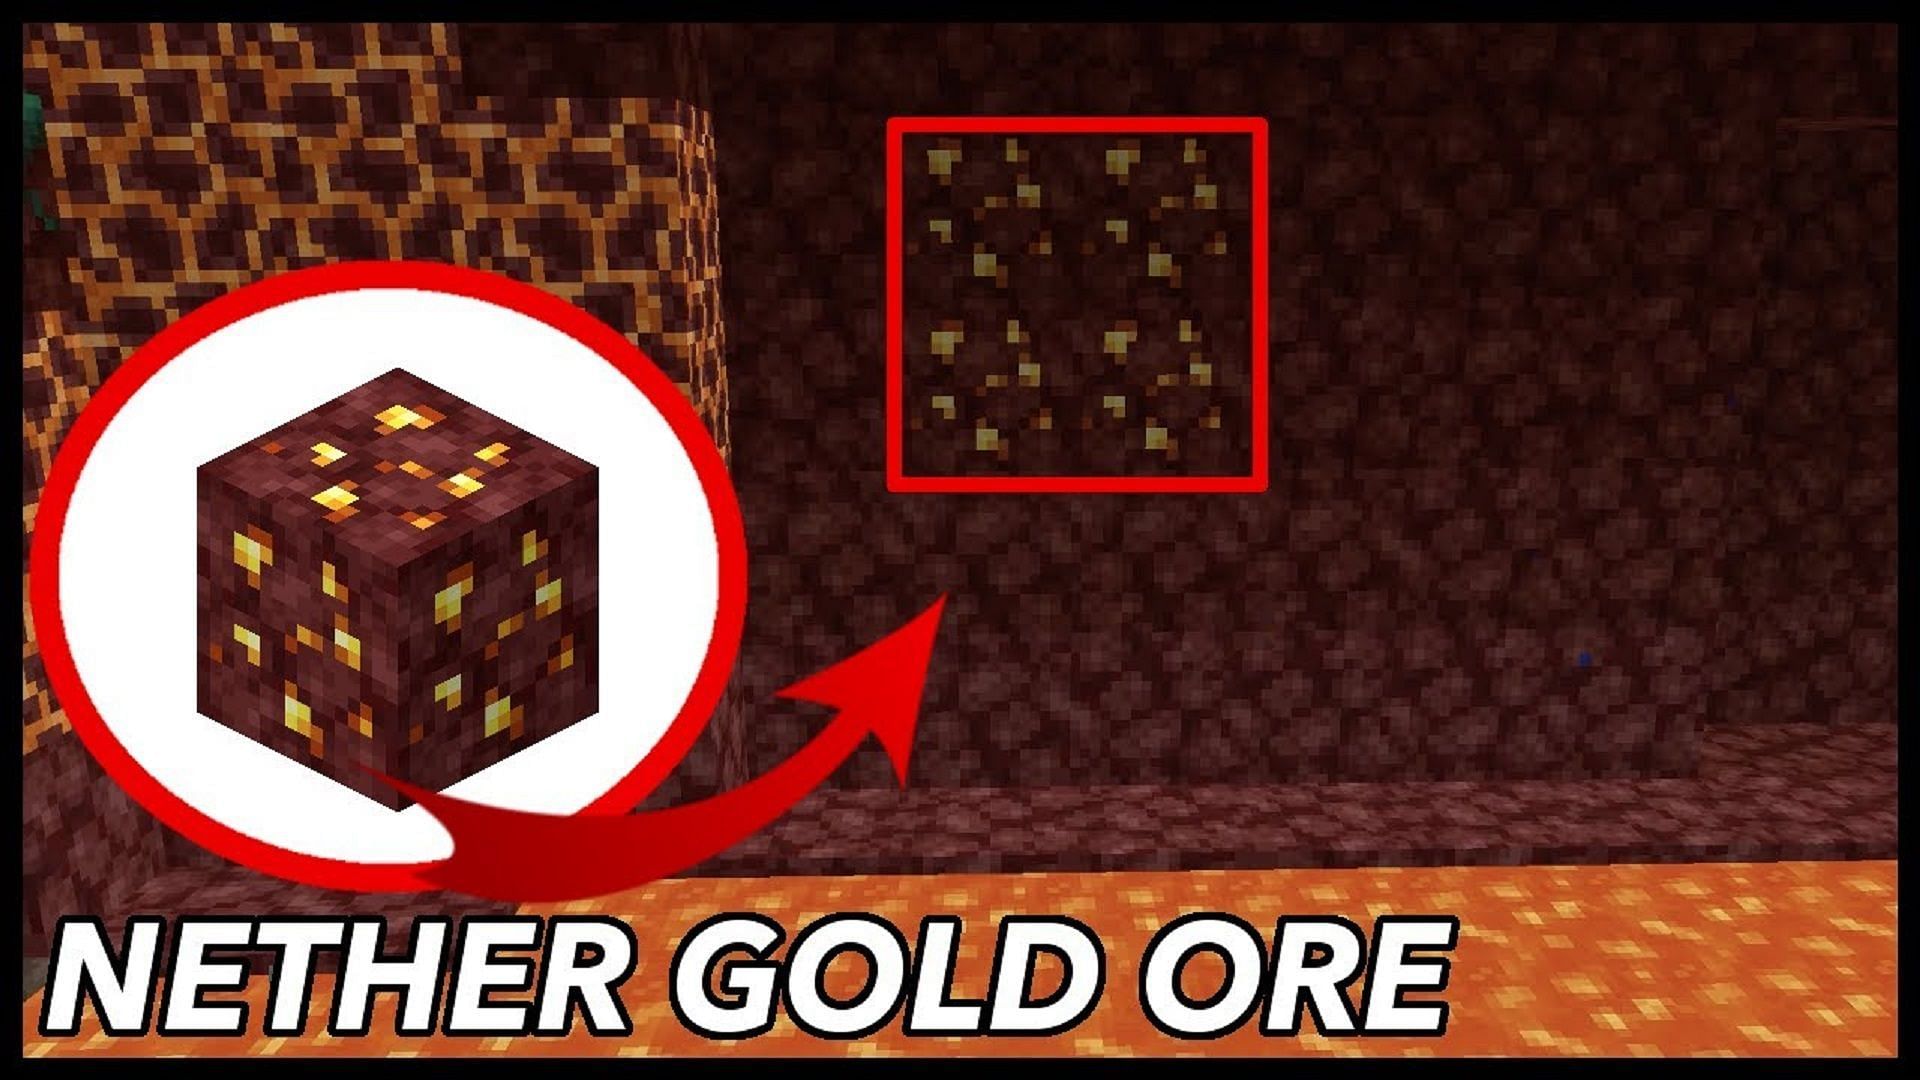 Nether gold ore in Minecraft (Image via RajCraft/Youtube)